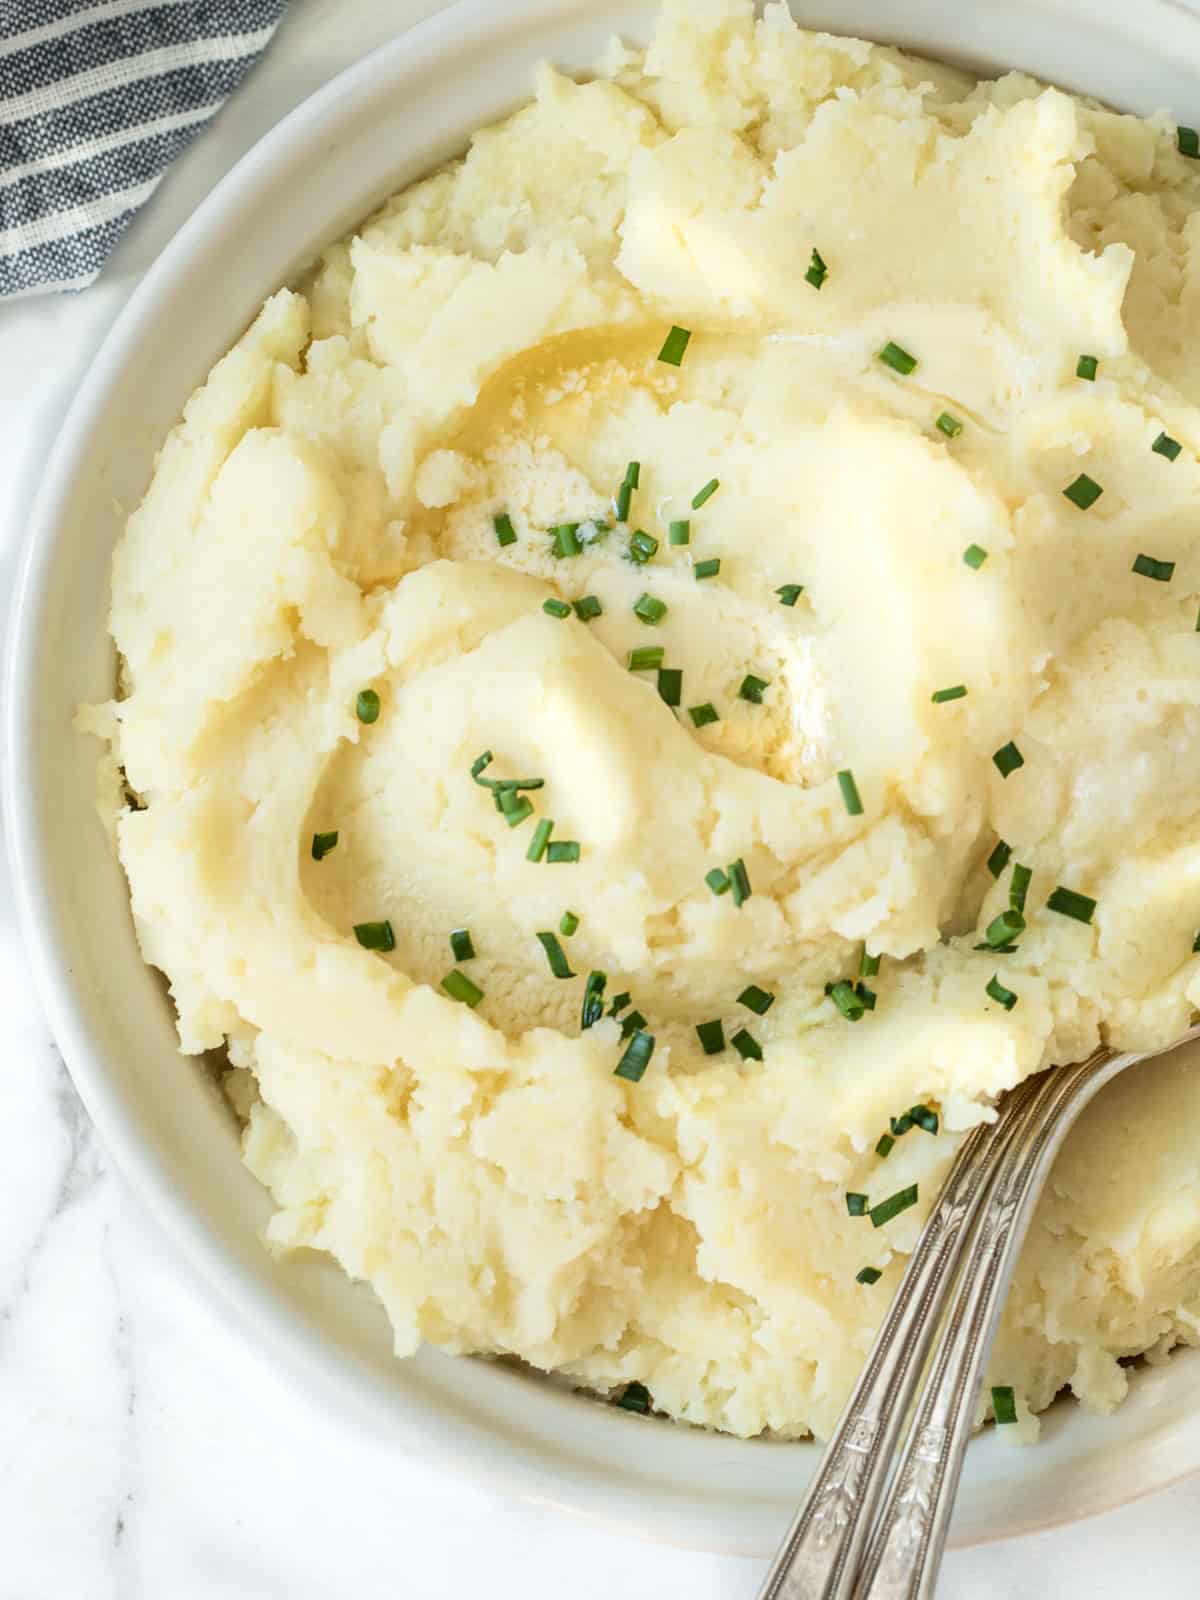 Bowl of mashed potatoes with chives sprinkled on top.